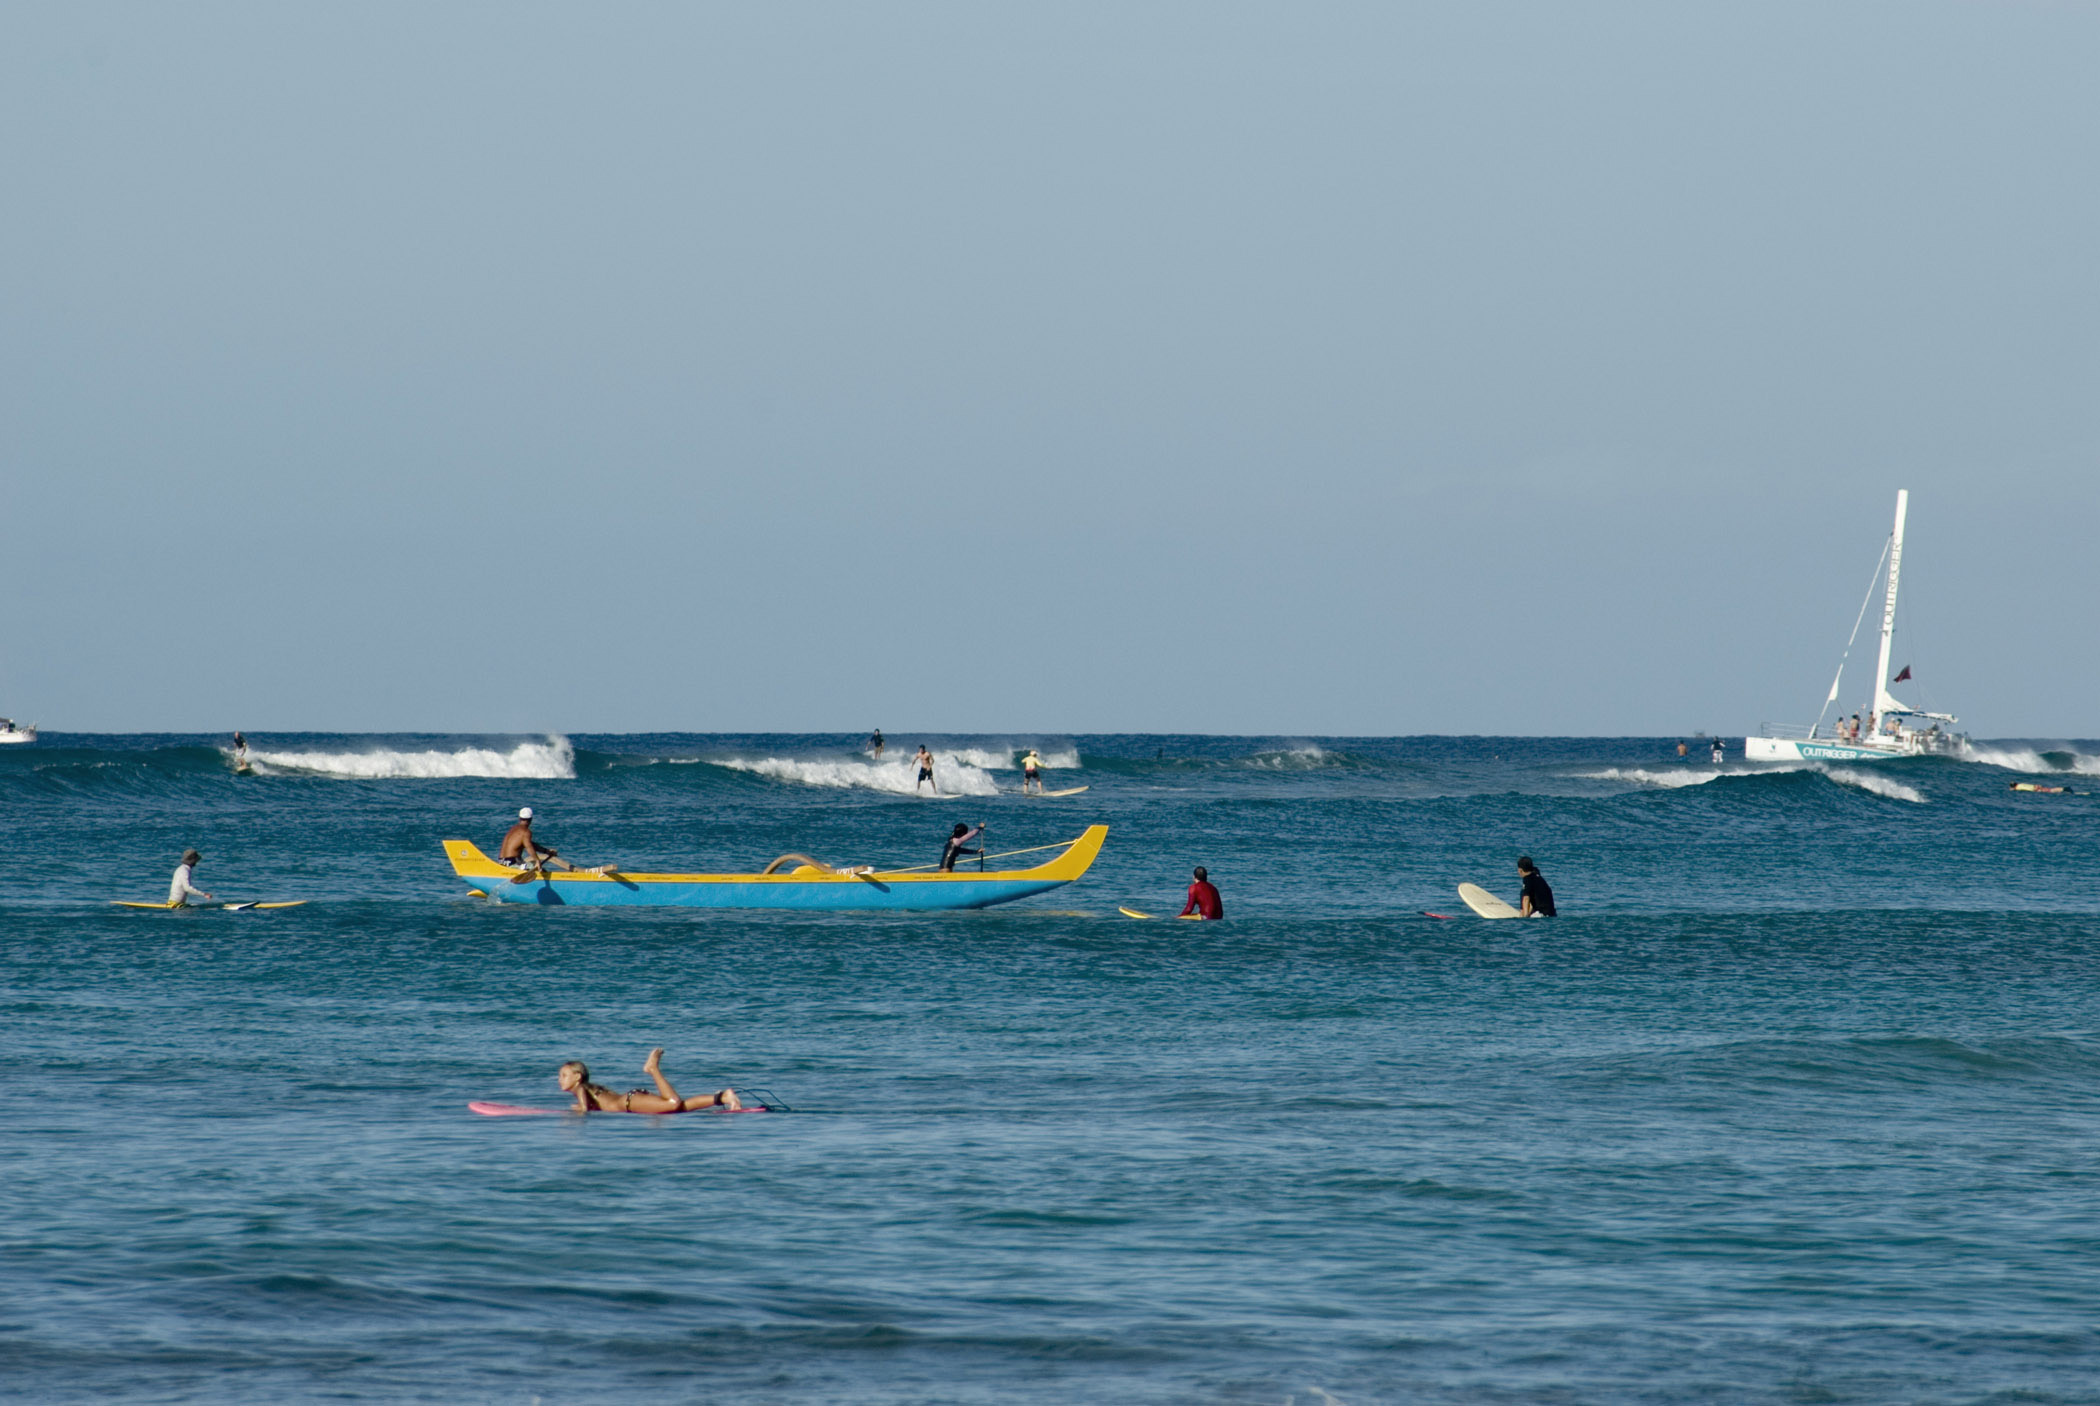 Honolulu Outrigger Canoe and Surfers in Ocean, Hawaii